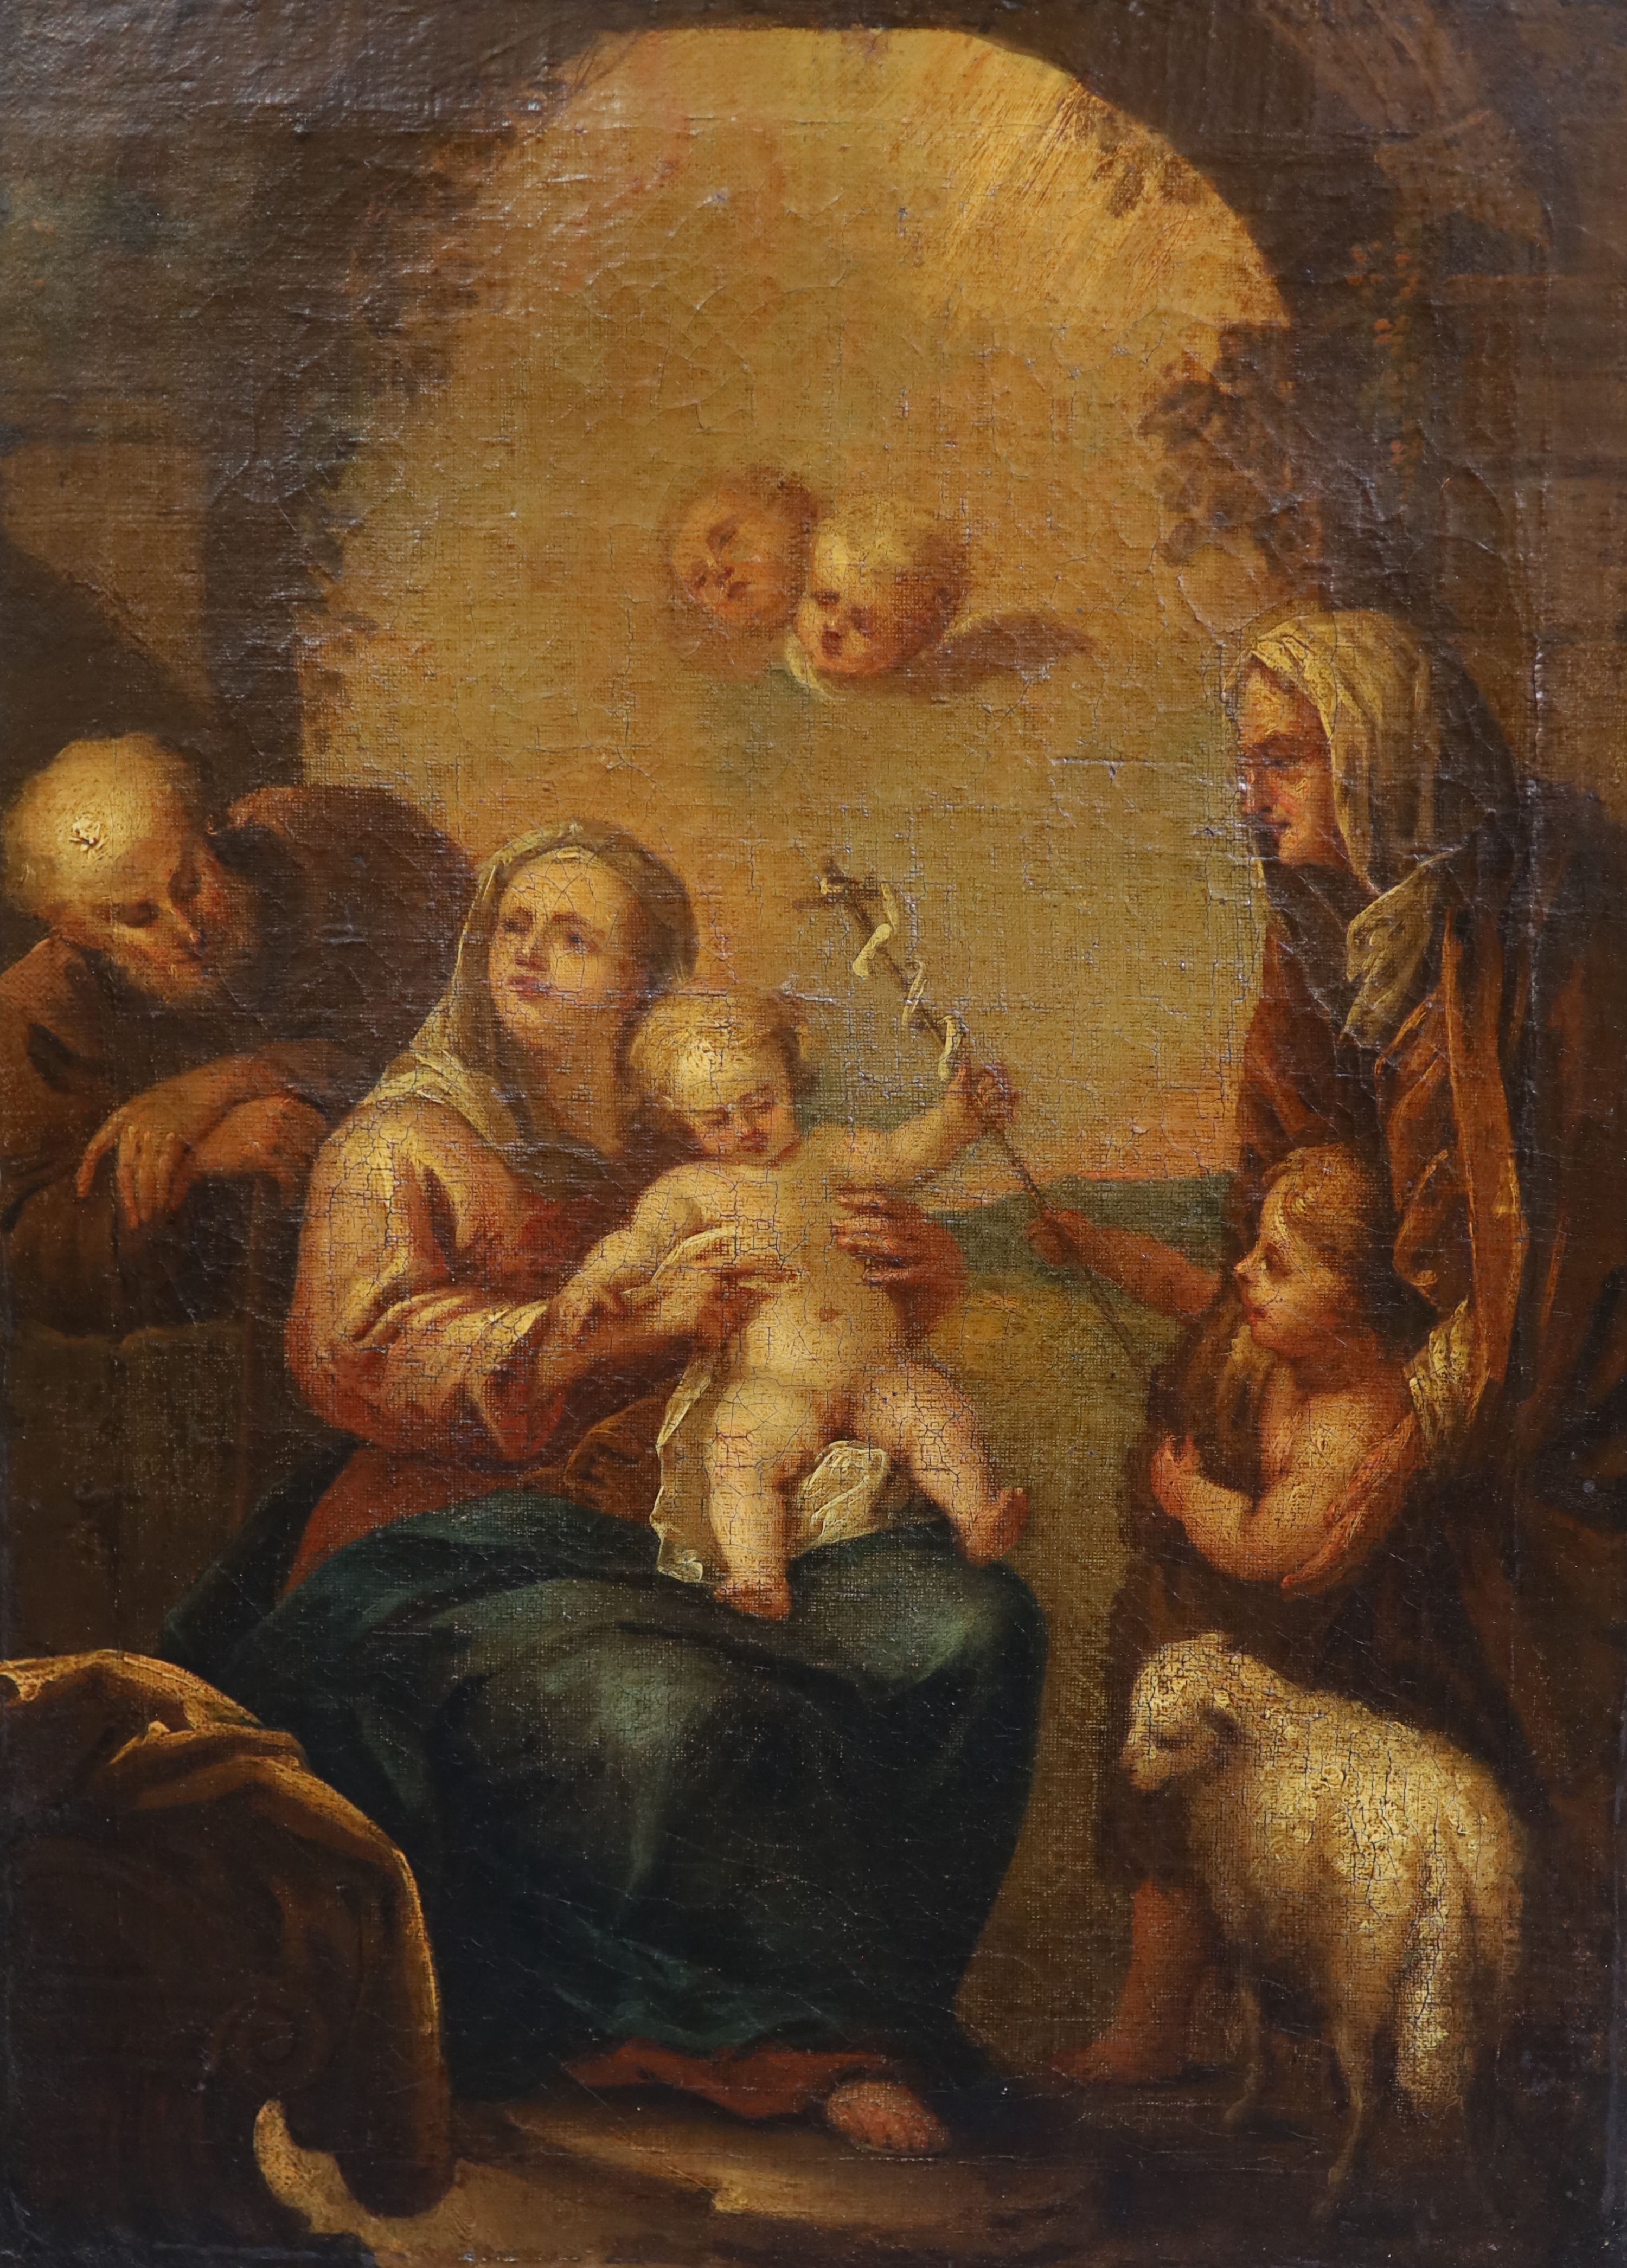 17th century Italian school - The Holy Family with St.John the Baptist and St. Anne